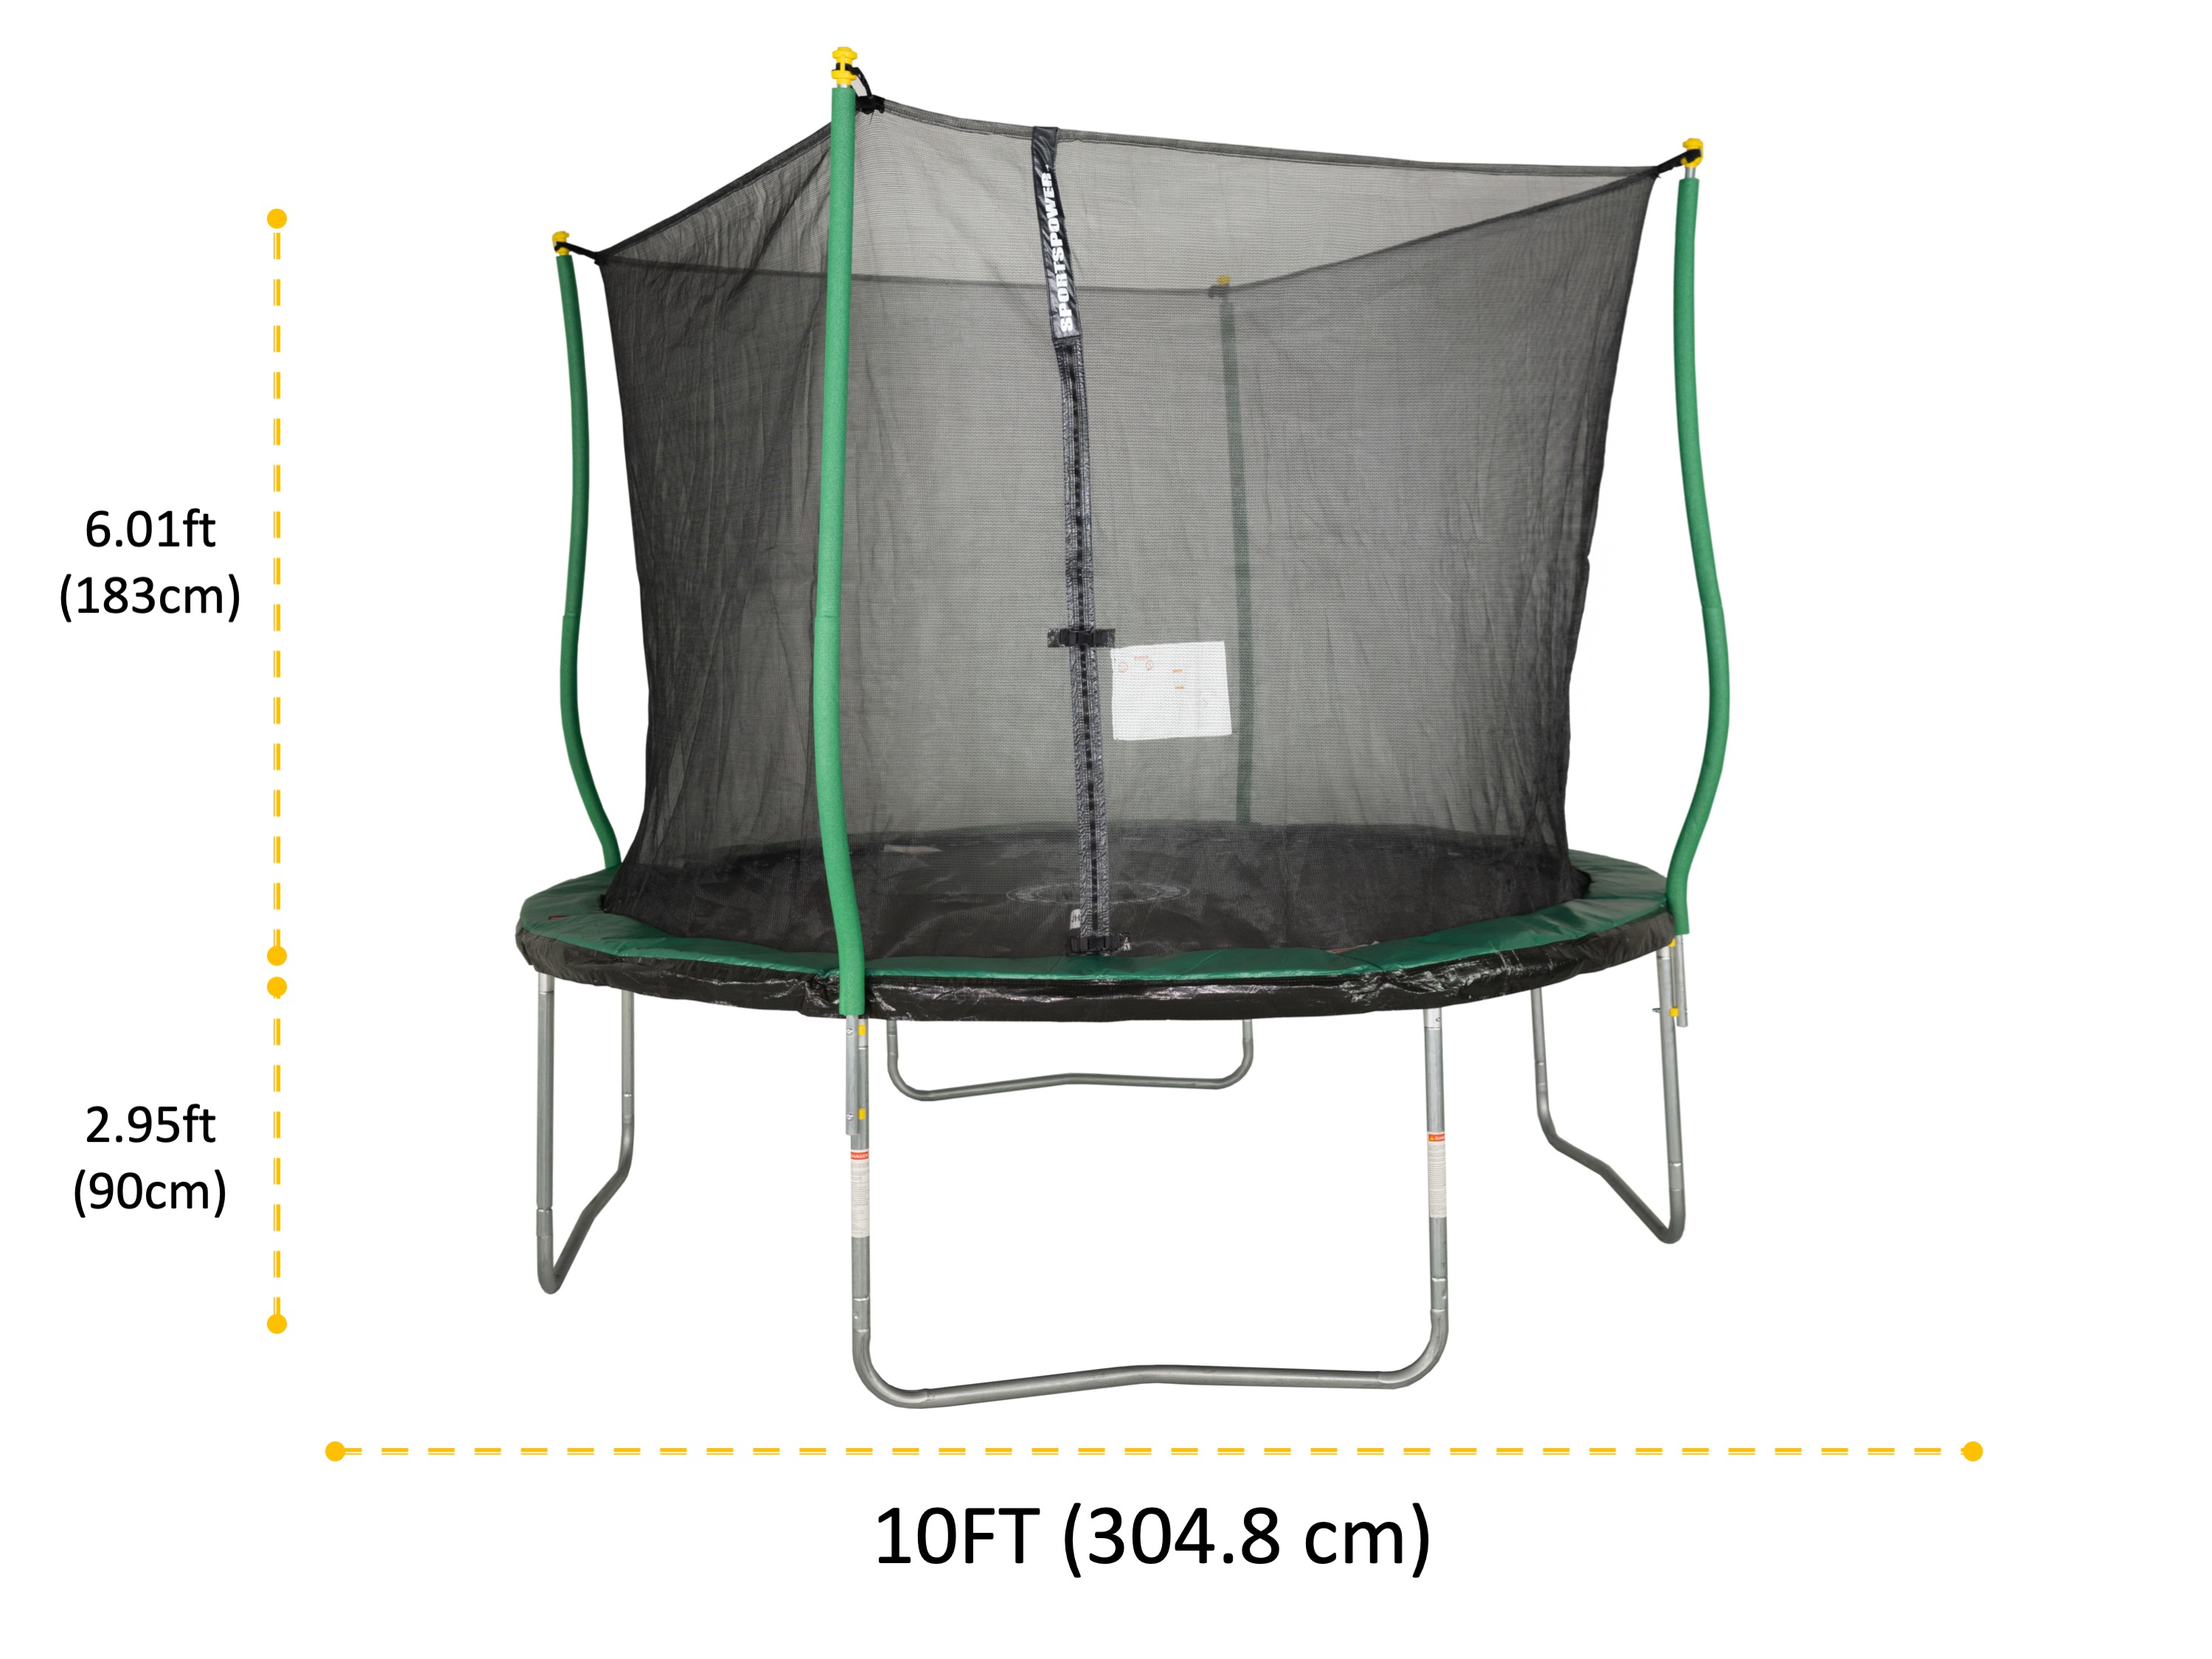 Bounce Pro 10' Trampoline, Flash Light Zone, Classic Safety Enclosure, Green/Black - image 2 of 9